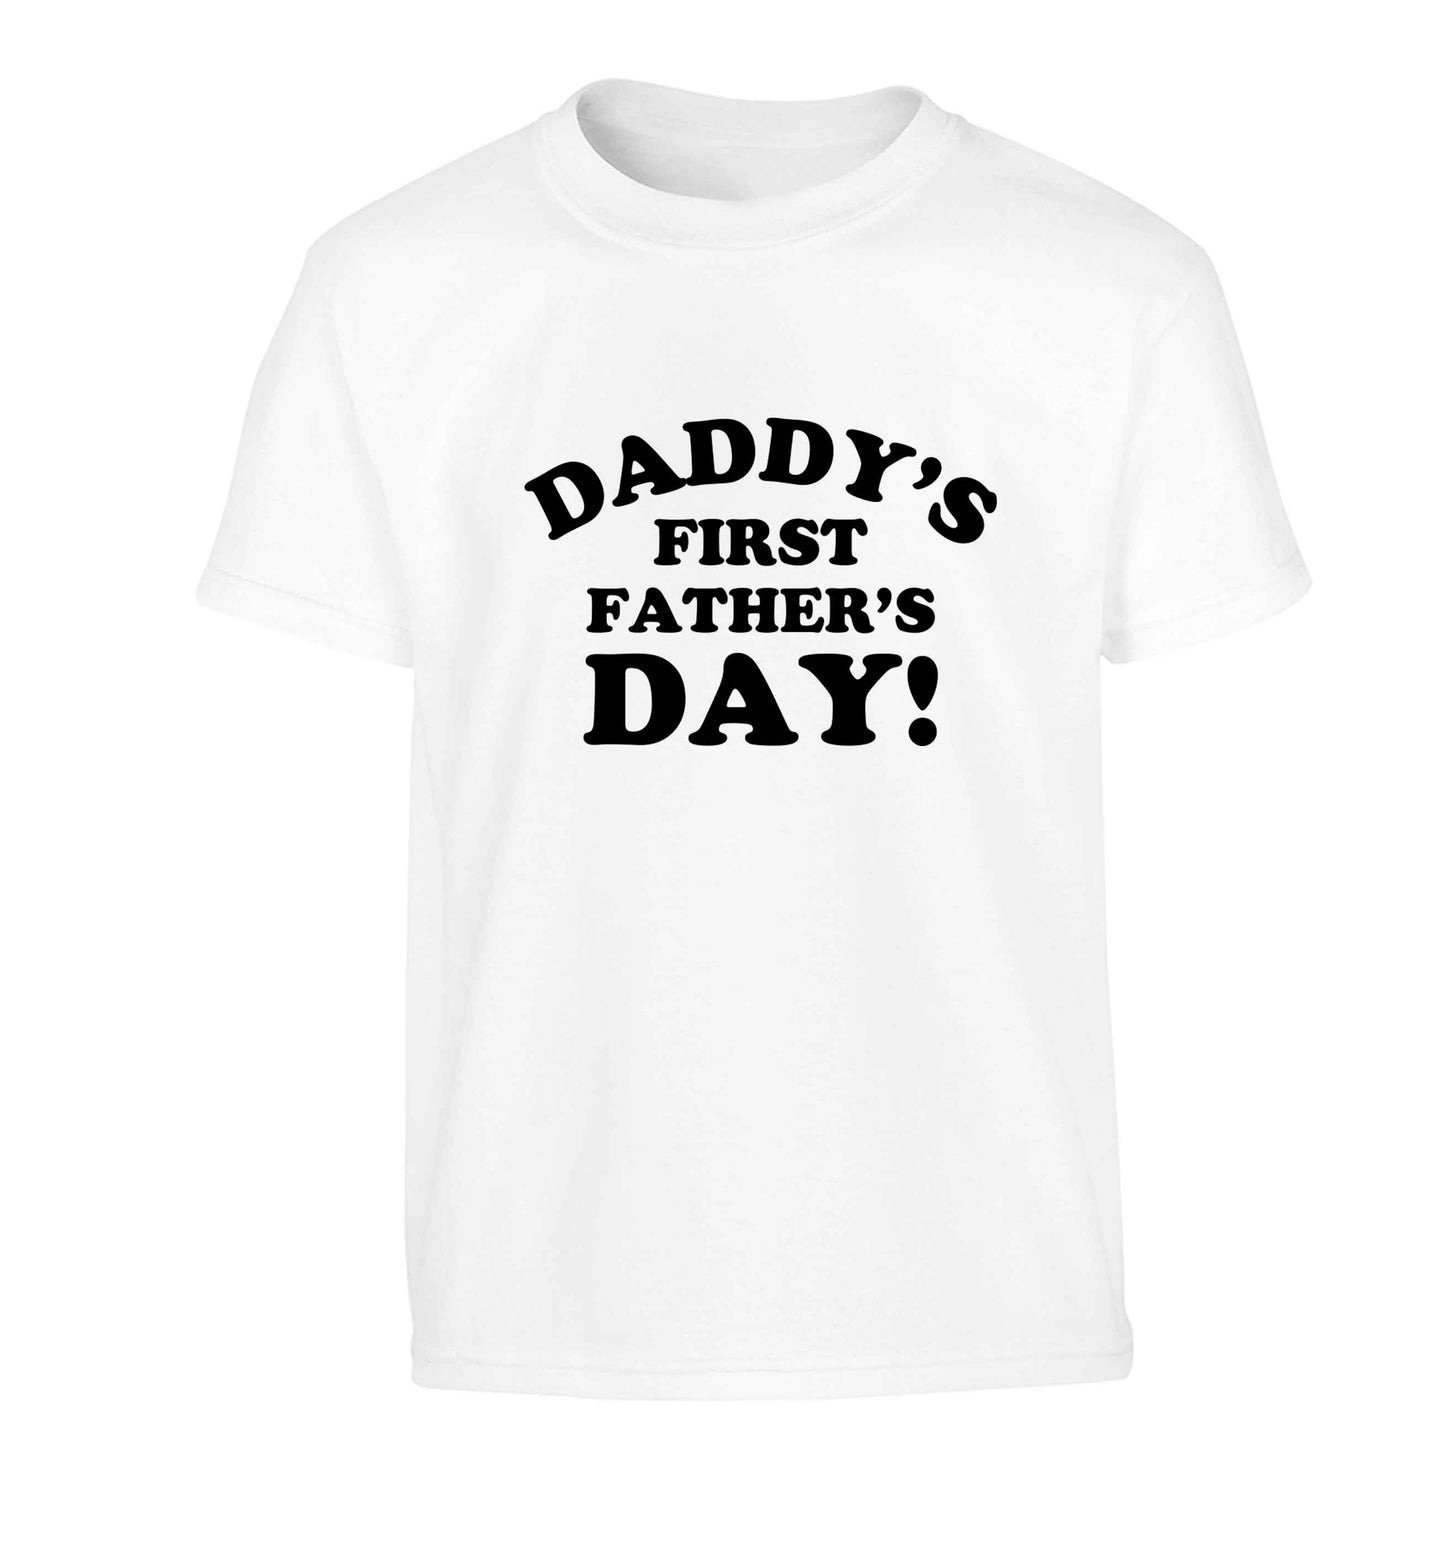 Daddy's first father's day Children's white Tshirt 12-13 Years